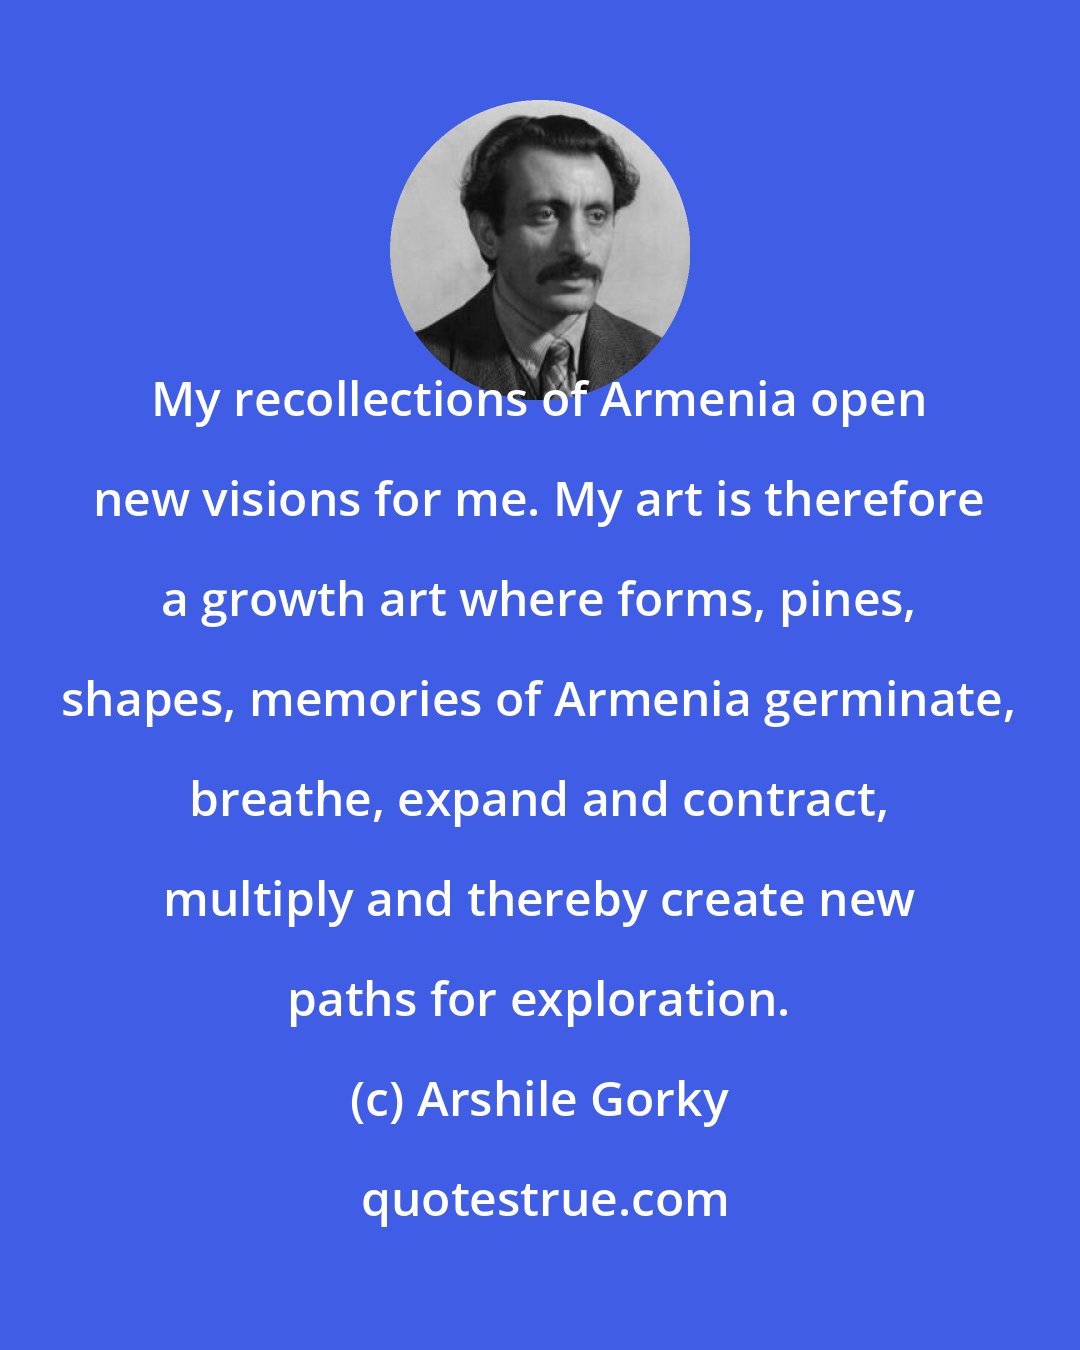 Arshile Gorky: My recollections of Armenia open new visions for me. My art is therefore a growth art where forms, pines, shapes, memories of Armenia germinate, breathe, expand and contract, multiply and thereby create new paths for exploration.